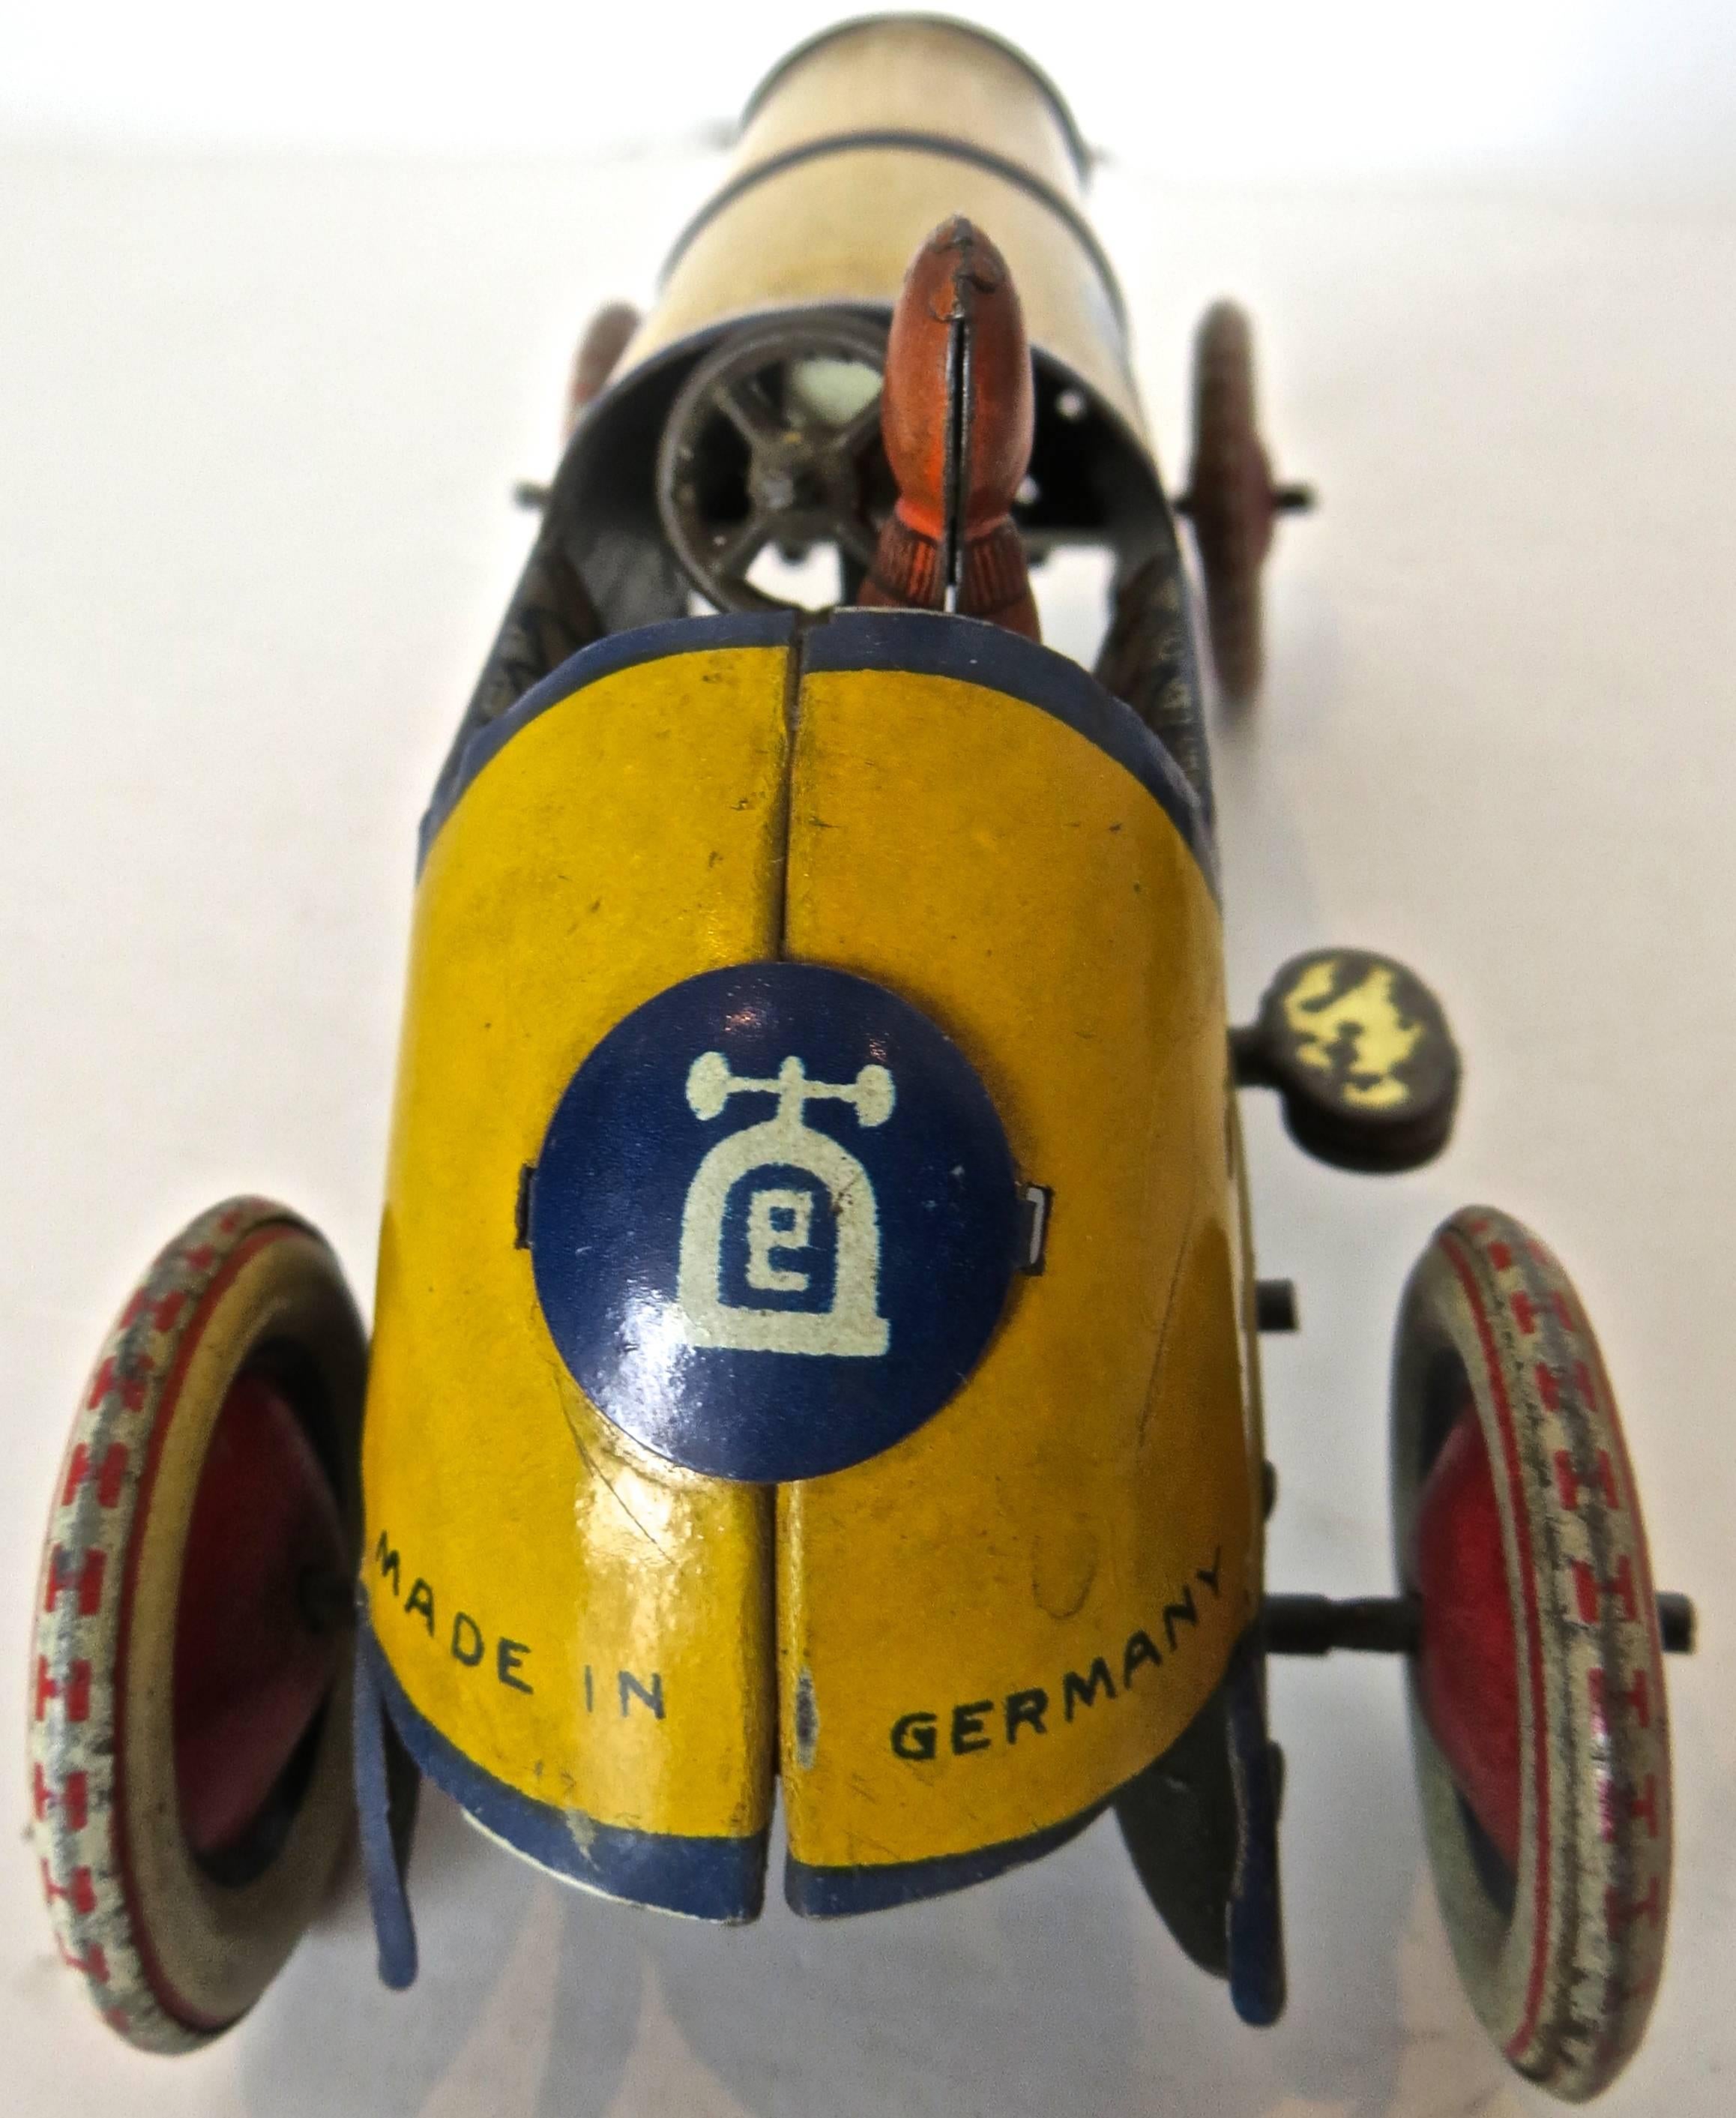 Hand-Painted Antique Toy Two Car Garage with Autos by Lehman, Germany, circa 1927